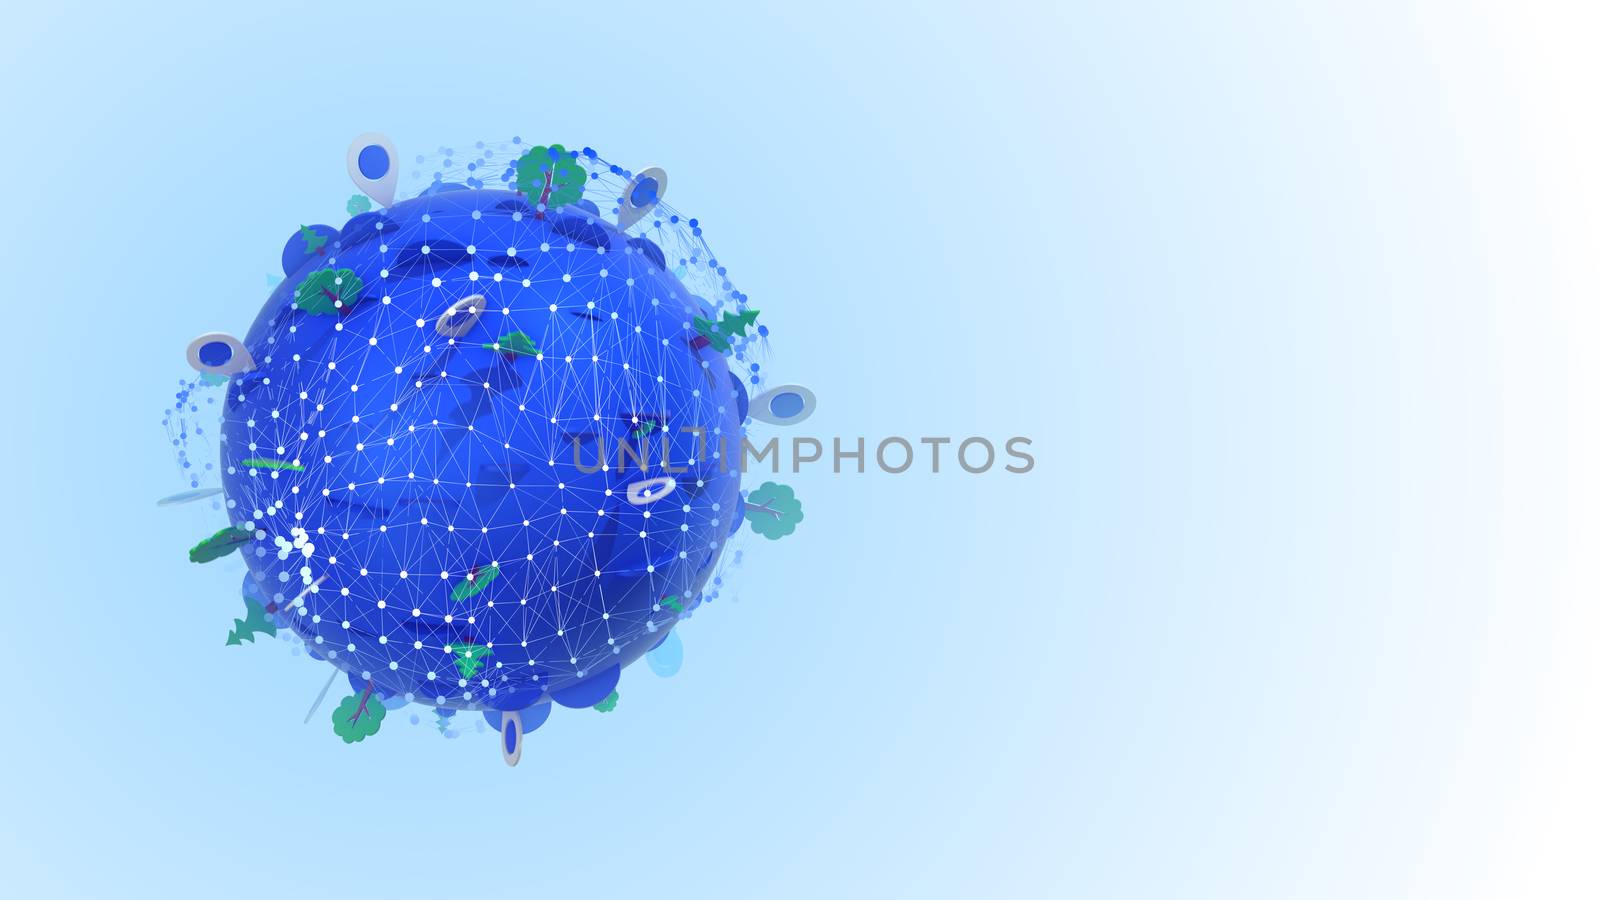 Multidimensional 3d illustration of a blue globe with modules, trees, icons, and a white grid of geolocation points circling in the white background.